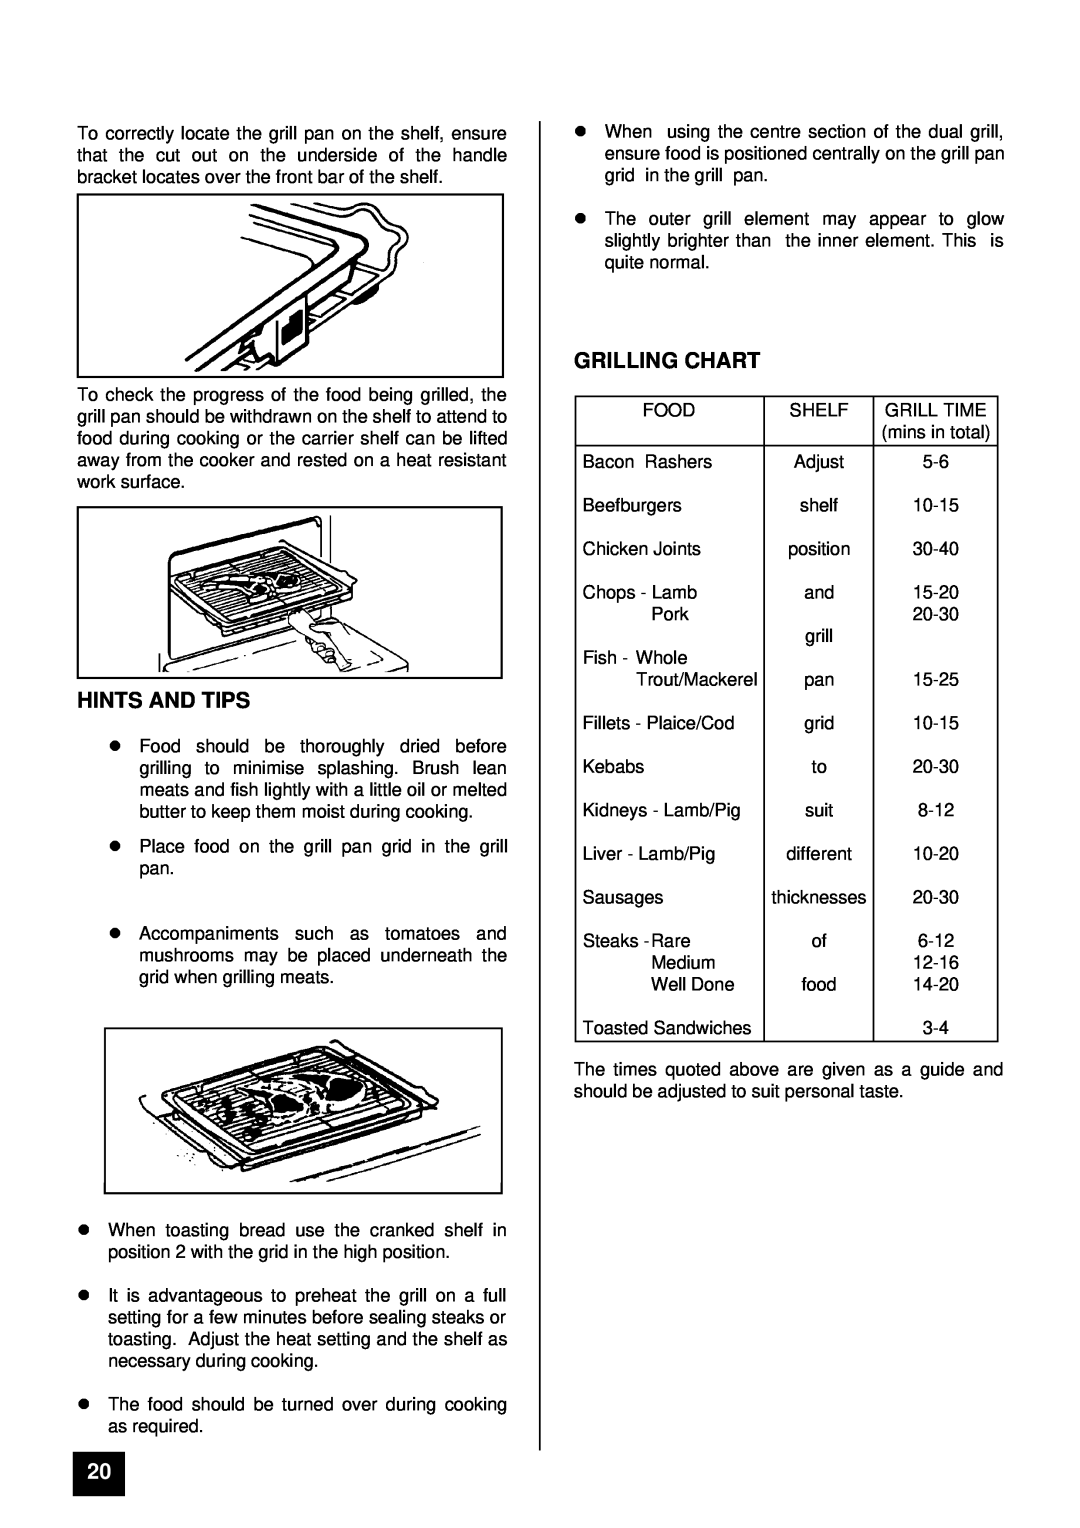 Zanussi ZCE 7400 manual Hints And Tips, Grilling Chart, thicknesses 